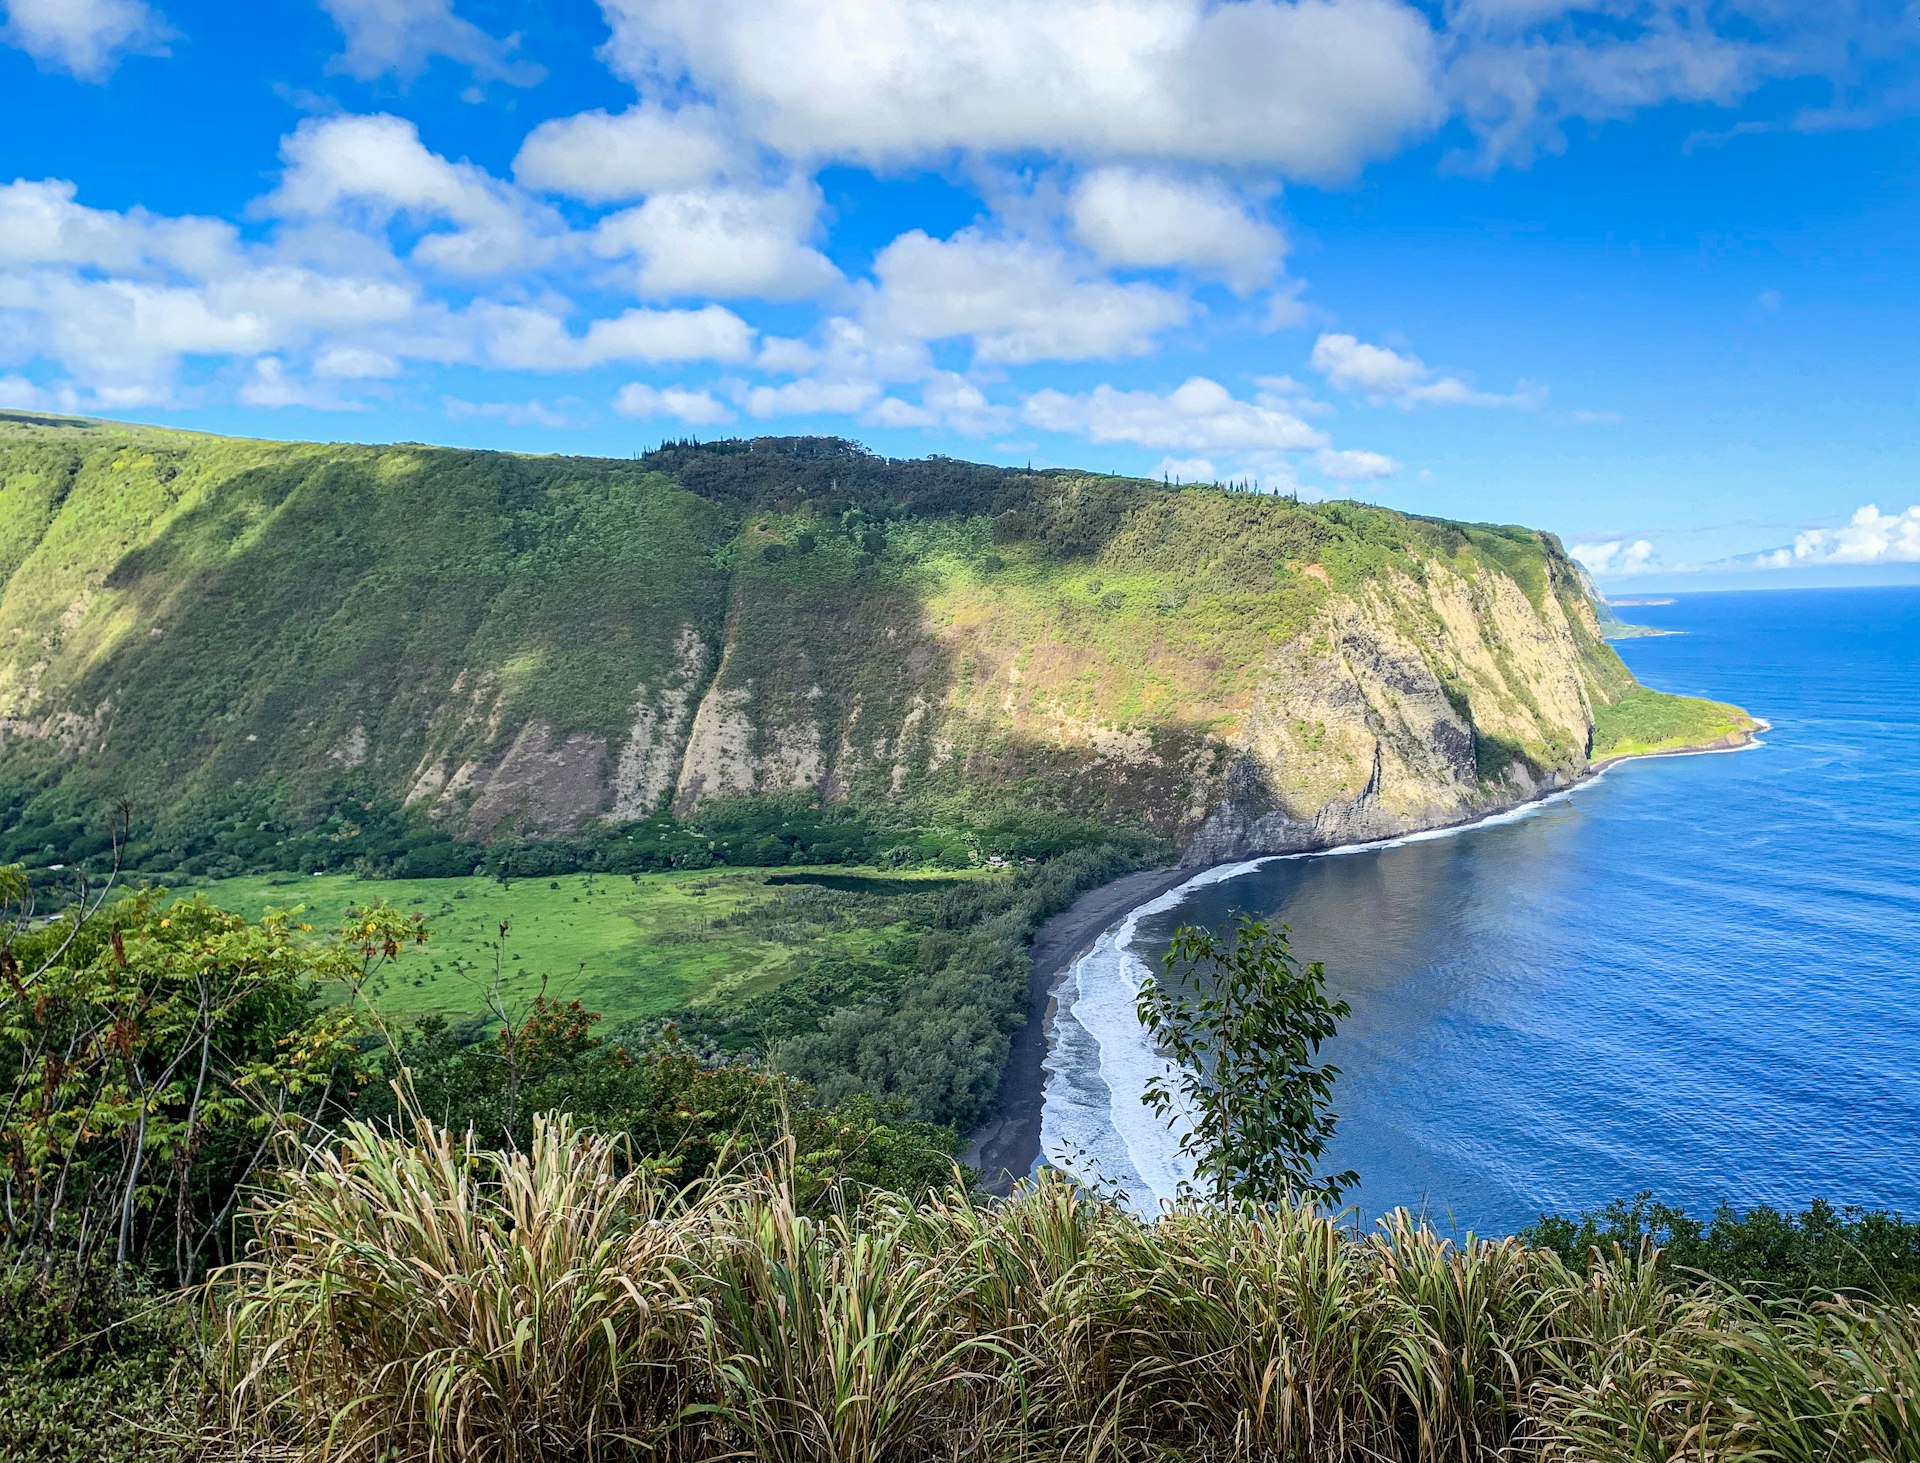 View from Waipi‘o Valley, with a black-sand beach below and high cliff walls in the background